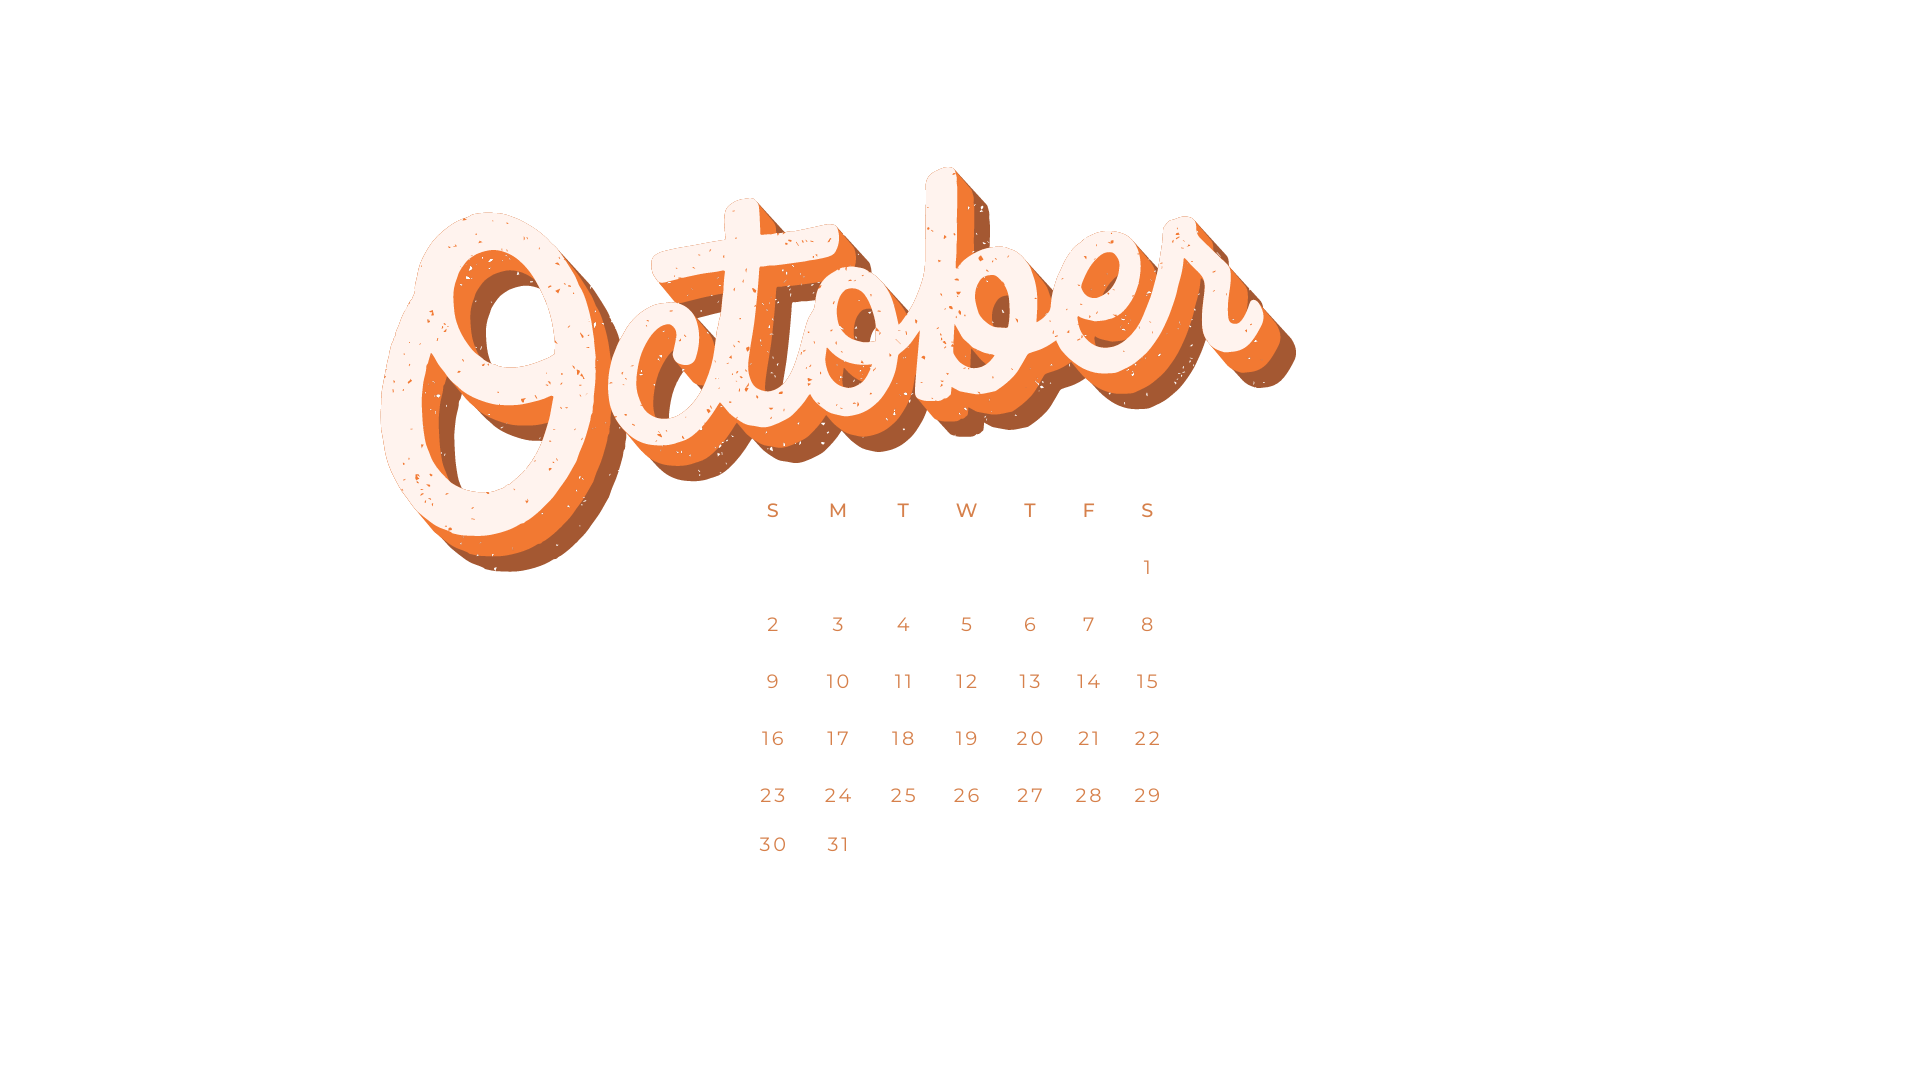 Free October 2022 Desktop Calendar Backgrounds; Here are your free October backgrounds for computers and laptops. Tech freebies for this month!